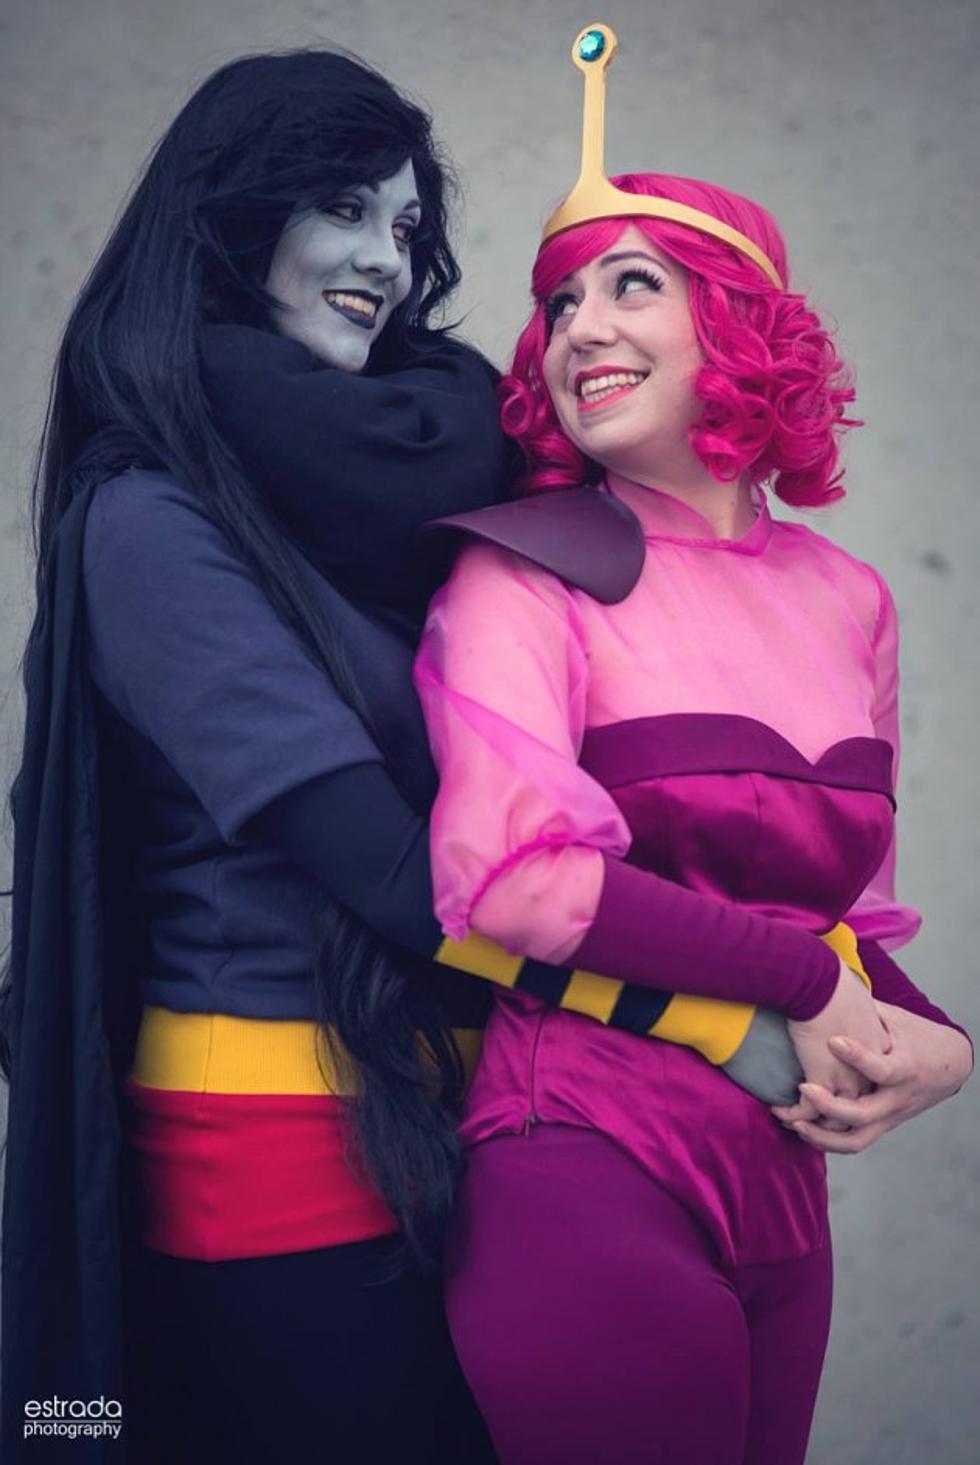 Come On, Grab Your Friends: The Best Adventure Time Cosplay